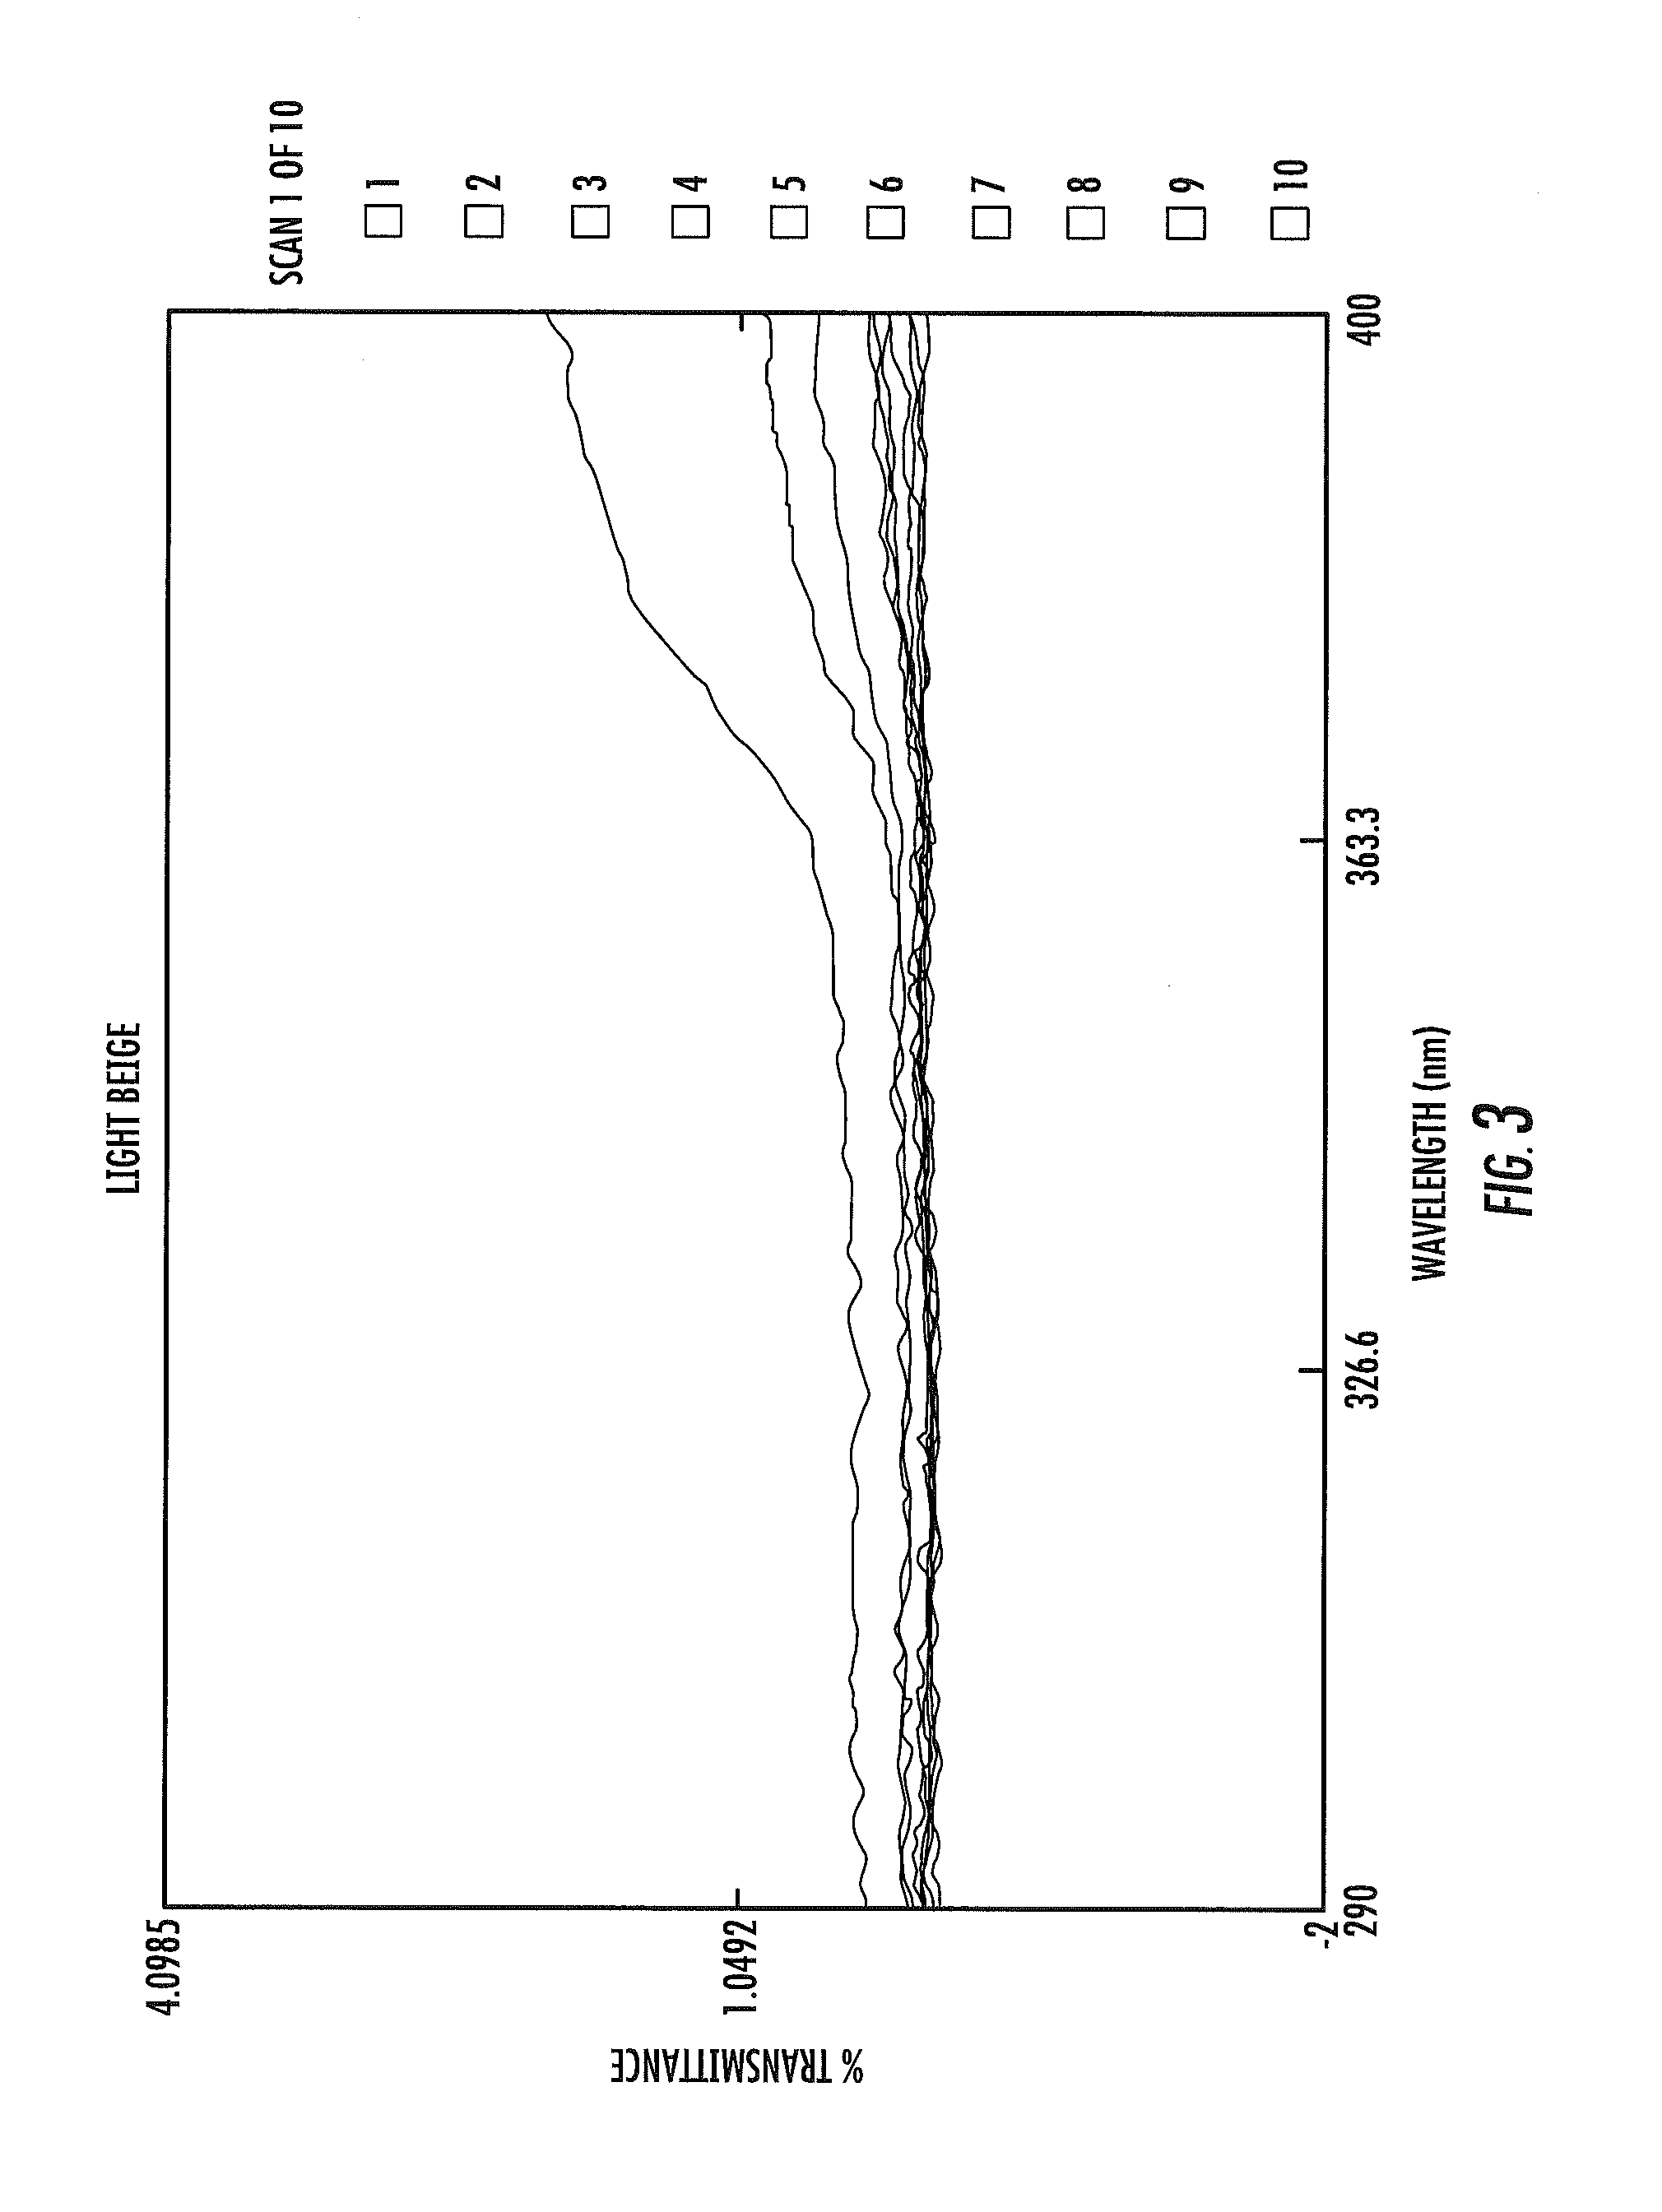 Skin coating composition and uses thereof